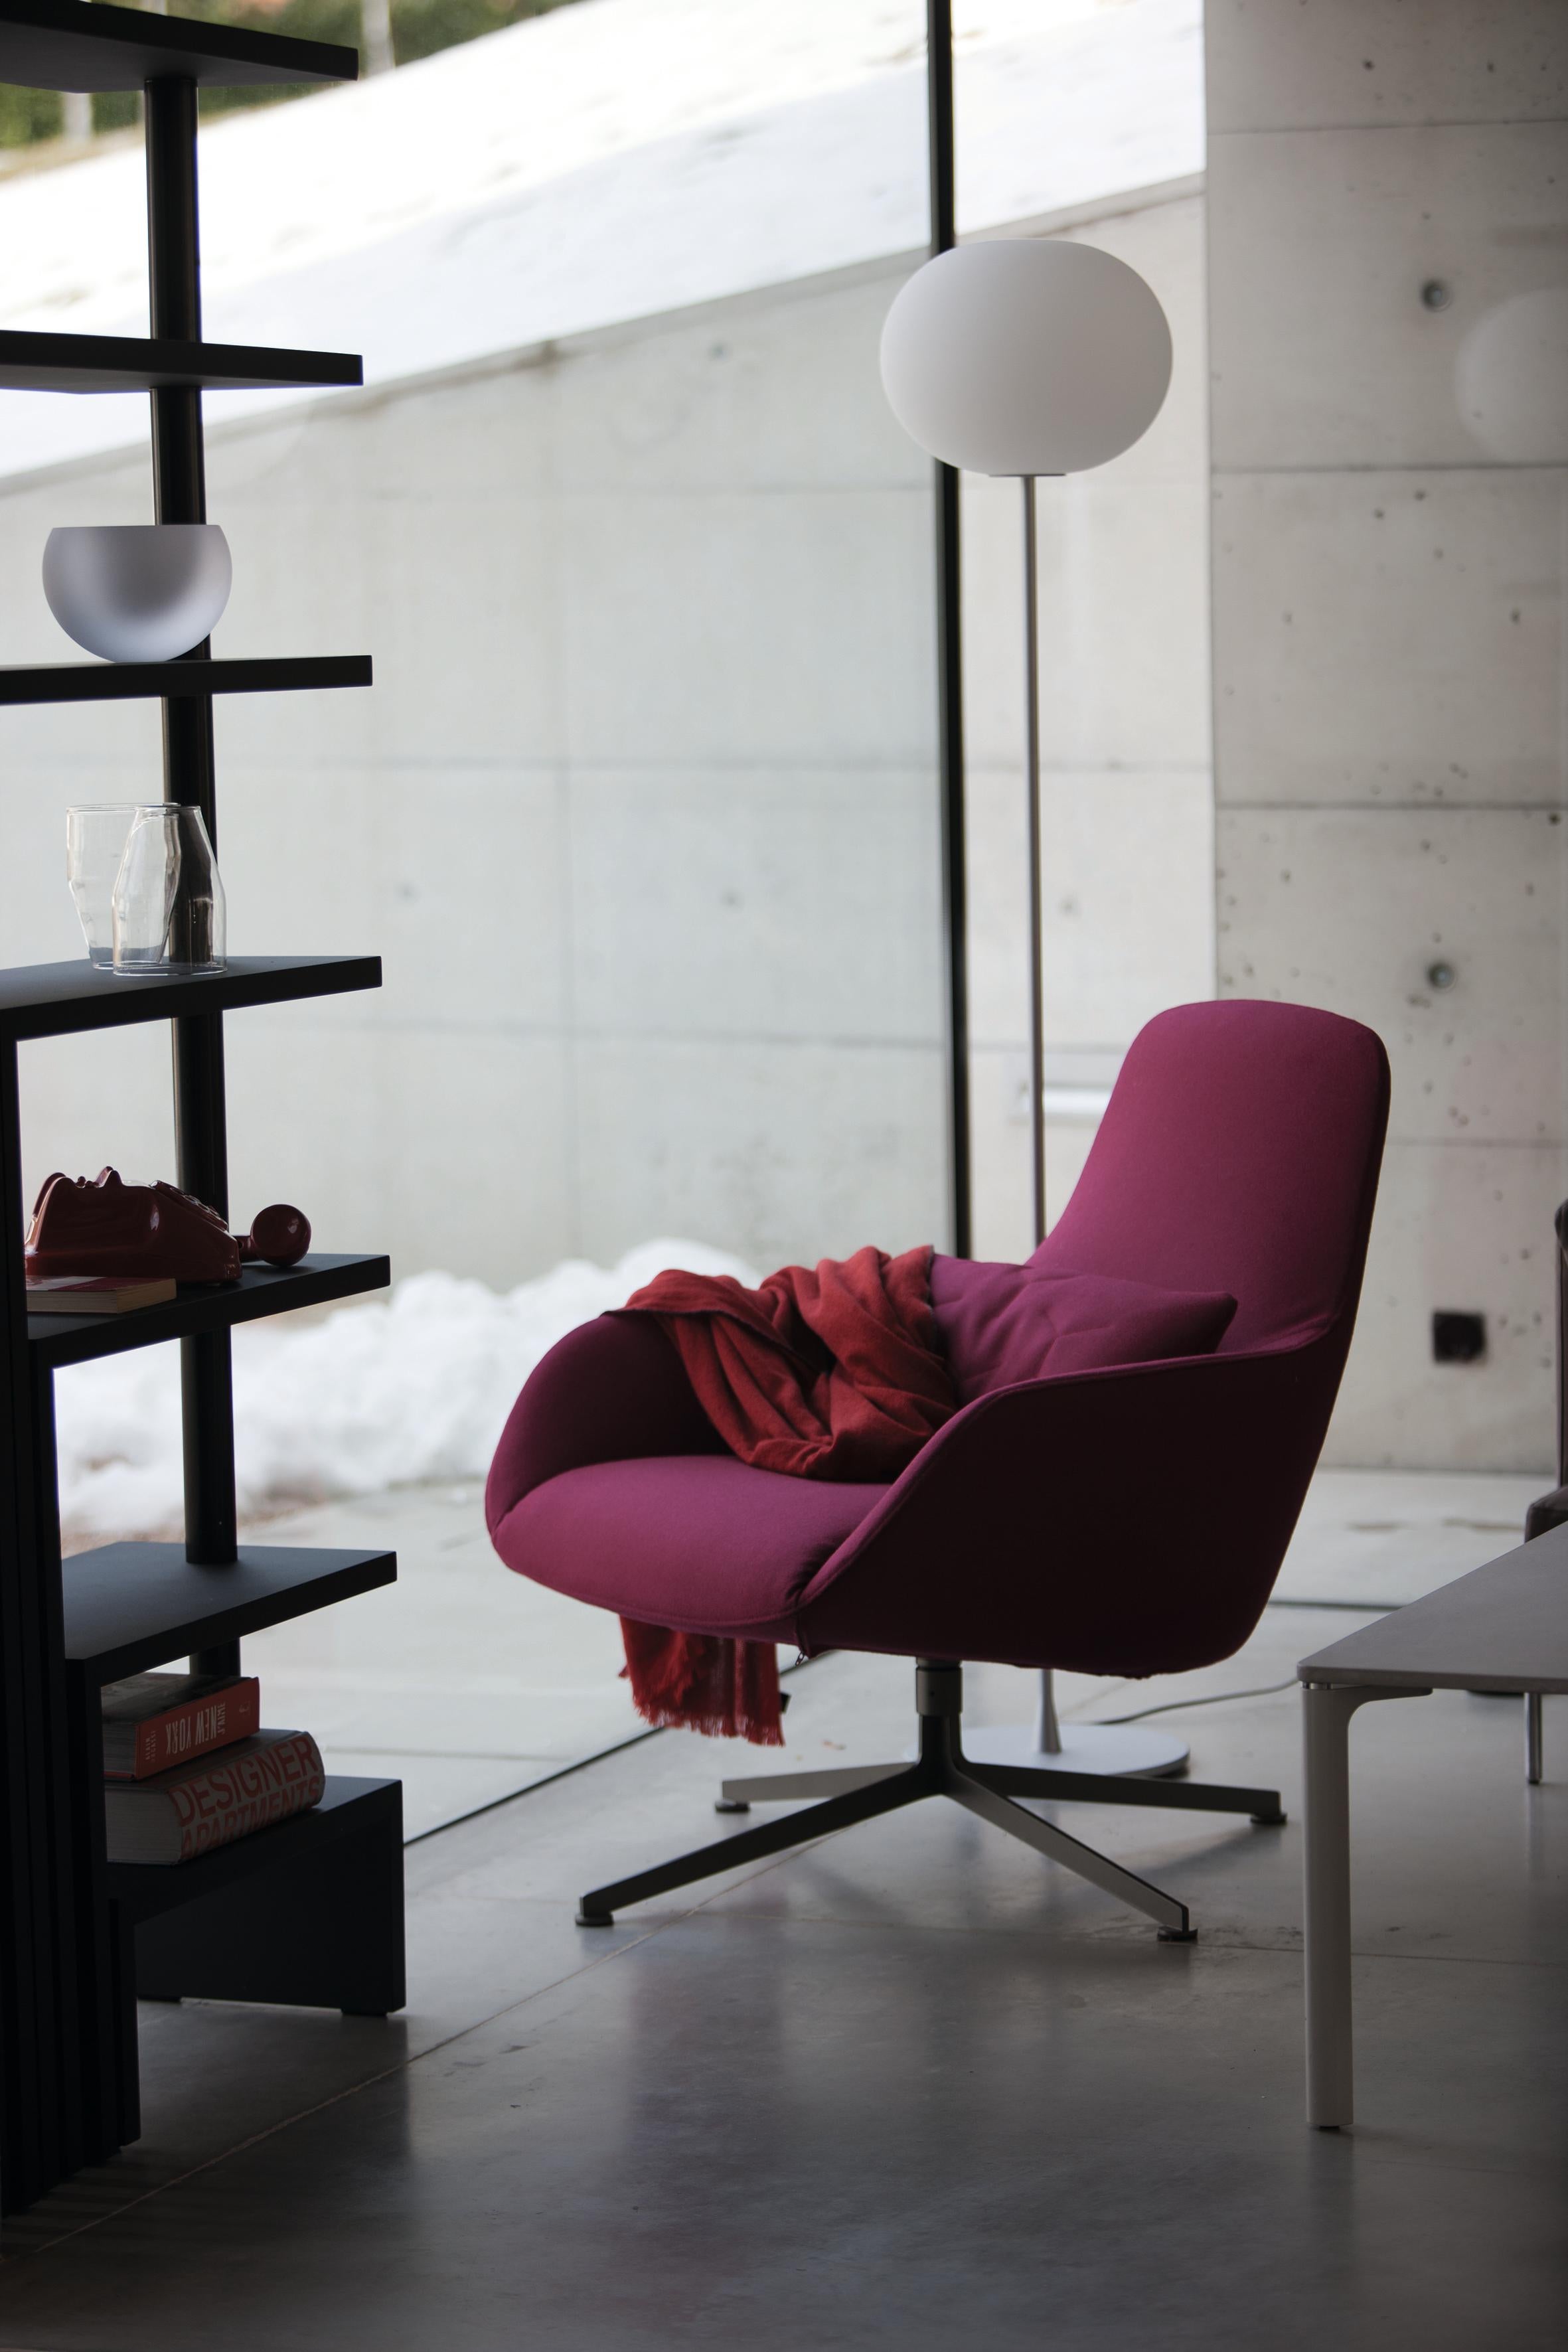 Zanotta Kent Armchair in Red Upholstery with Black Varnished Steel Frame by Ludovica+Roberto Palomba

Revolving base in varnished steel, colors: black or graphite. Steel frame. Upholstery in self-extinguishing graduated polyurethane foam/heat-bound